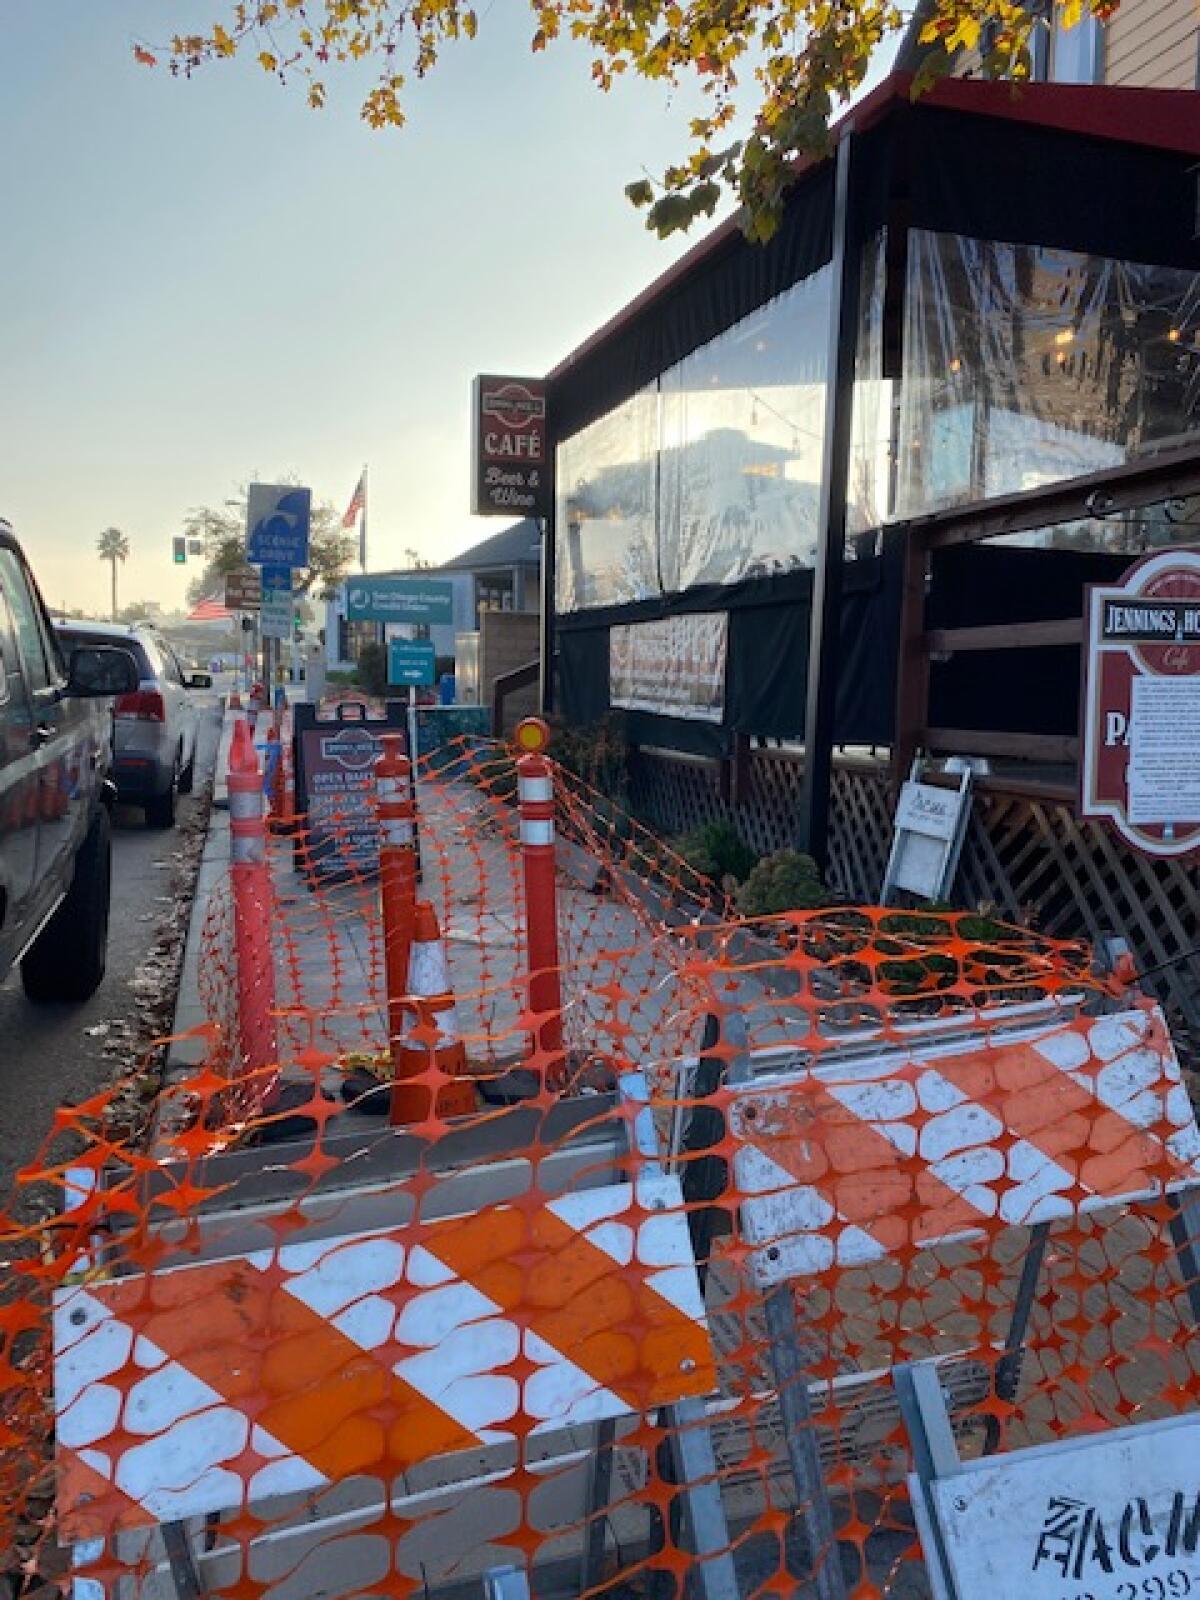 The sidewalk outside Jennings House Cafe on Rosecrans Street is pictured during construction on Village Anchor Lights.